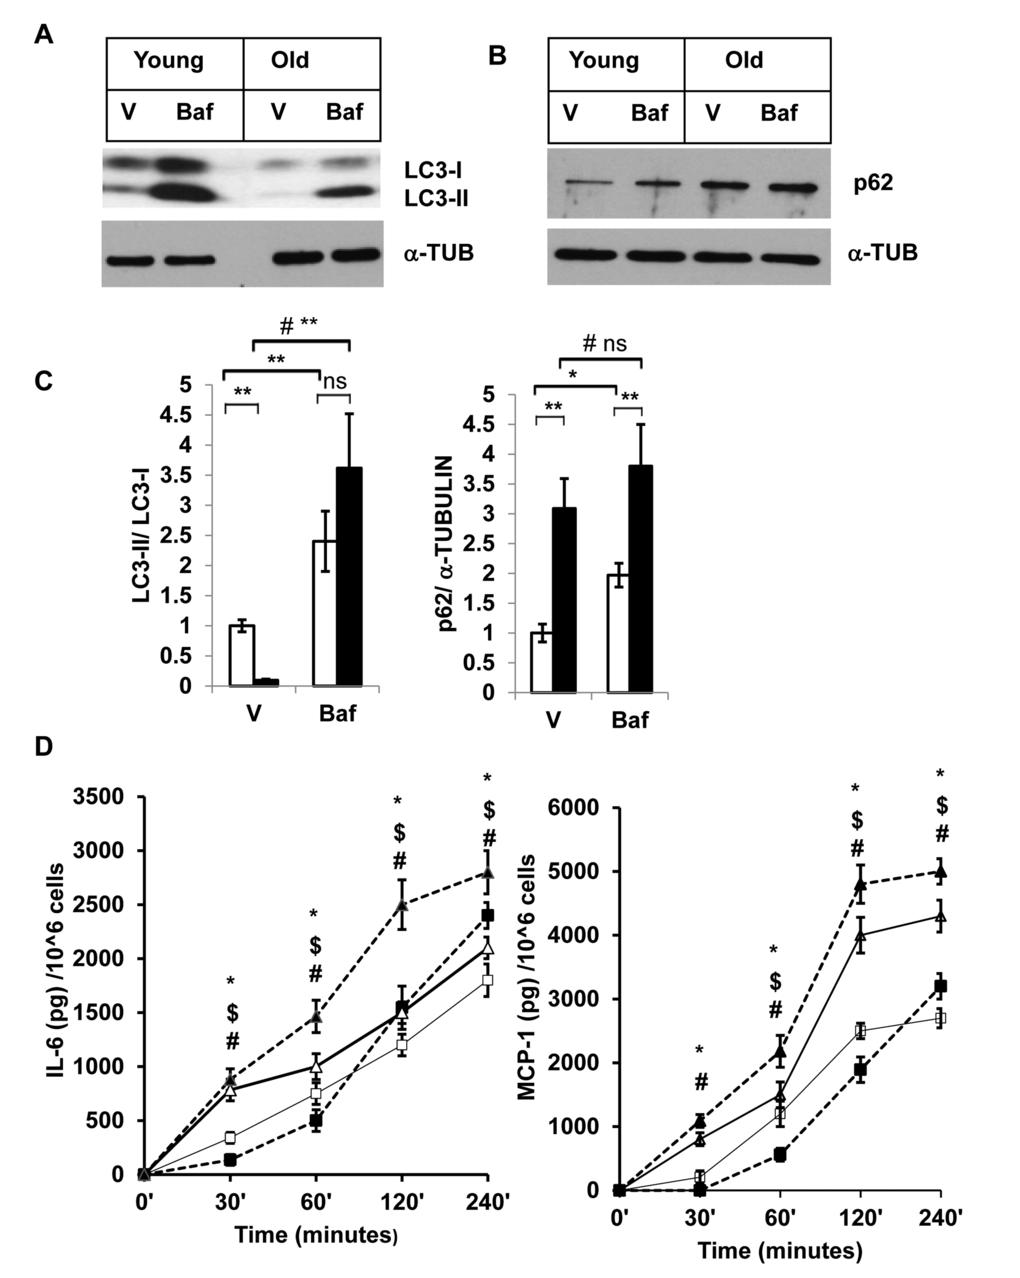 Enhanced accumulation of autophagy substrates in old SVFs and elevated pro-inflammatory cytokines release after autophagy block. (A and B) Western blot analysis of autophagy associated proteins SQSTM1/p62 and LC3-I and LC3-II in SVF lysates from young (n=5) and old mice (n=3) treated with either vehicle (DMSO) or Baf (10 nM) for 18h. The density of protein bands from three independent experiments were normalized with α-tubulin and plotted in (C). Student’s t-test was performed using means and SD where *p(D) Autophagy block results in elevated inflammatory cytokine production in old SVFs. Time dependent production of major pro-inflammatory cytokines (IL-6, MCP-1) by the SVF from young (square box) and old mice (triangle) treated with either vehicle (open) or Baf (filled) were analyzed by ELISA. Values were presented as mean + SD of three independent experiments. Significance of difference between means was determined by Student’s t-test and indicated by * p$ p# indicated the significance level (p